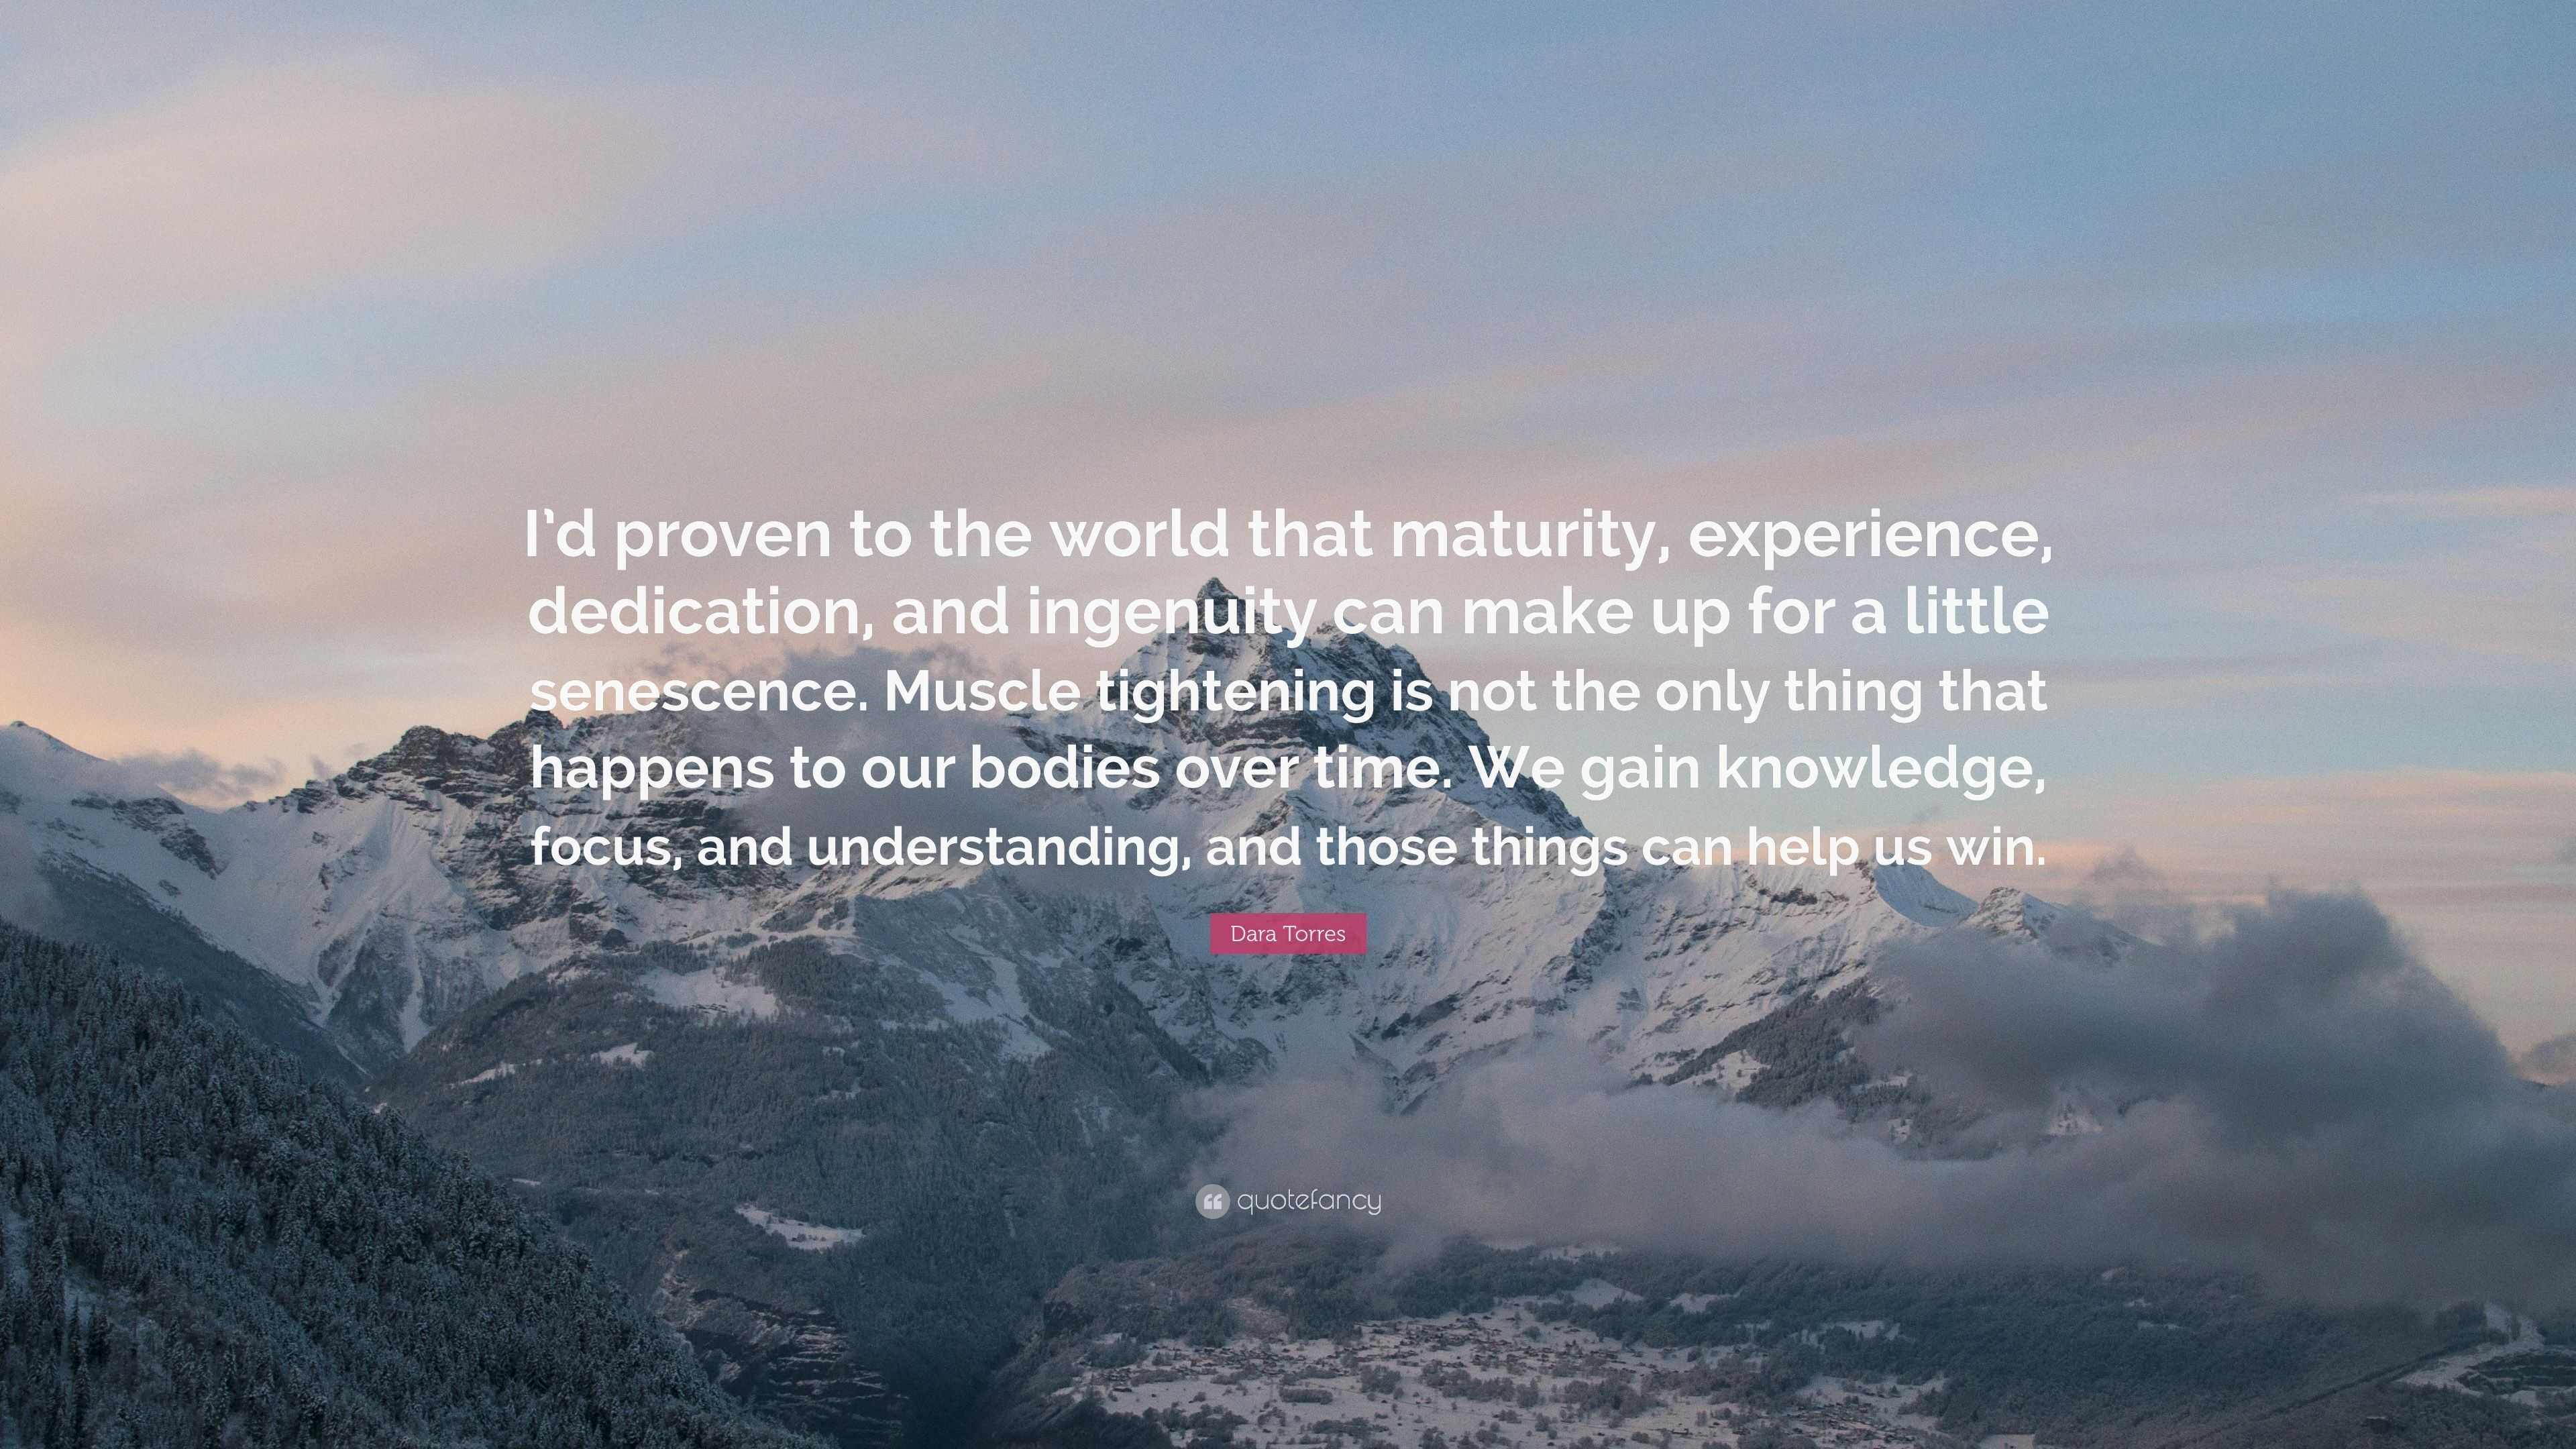 Dara Torres Quote: “I'd proven to the world that maturity